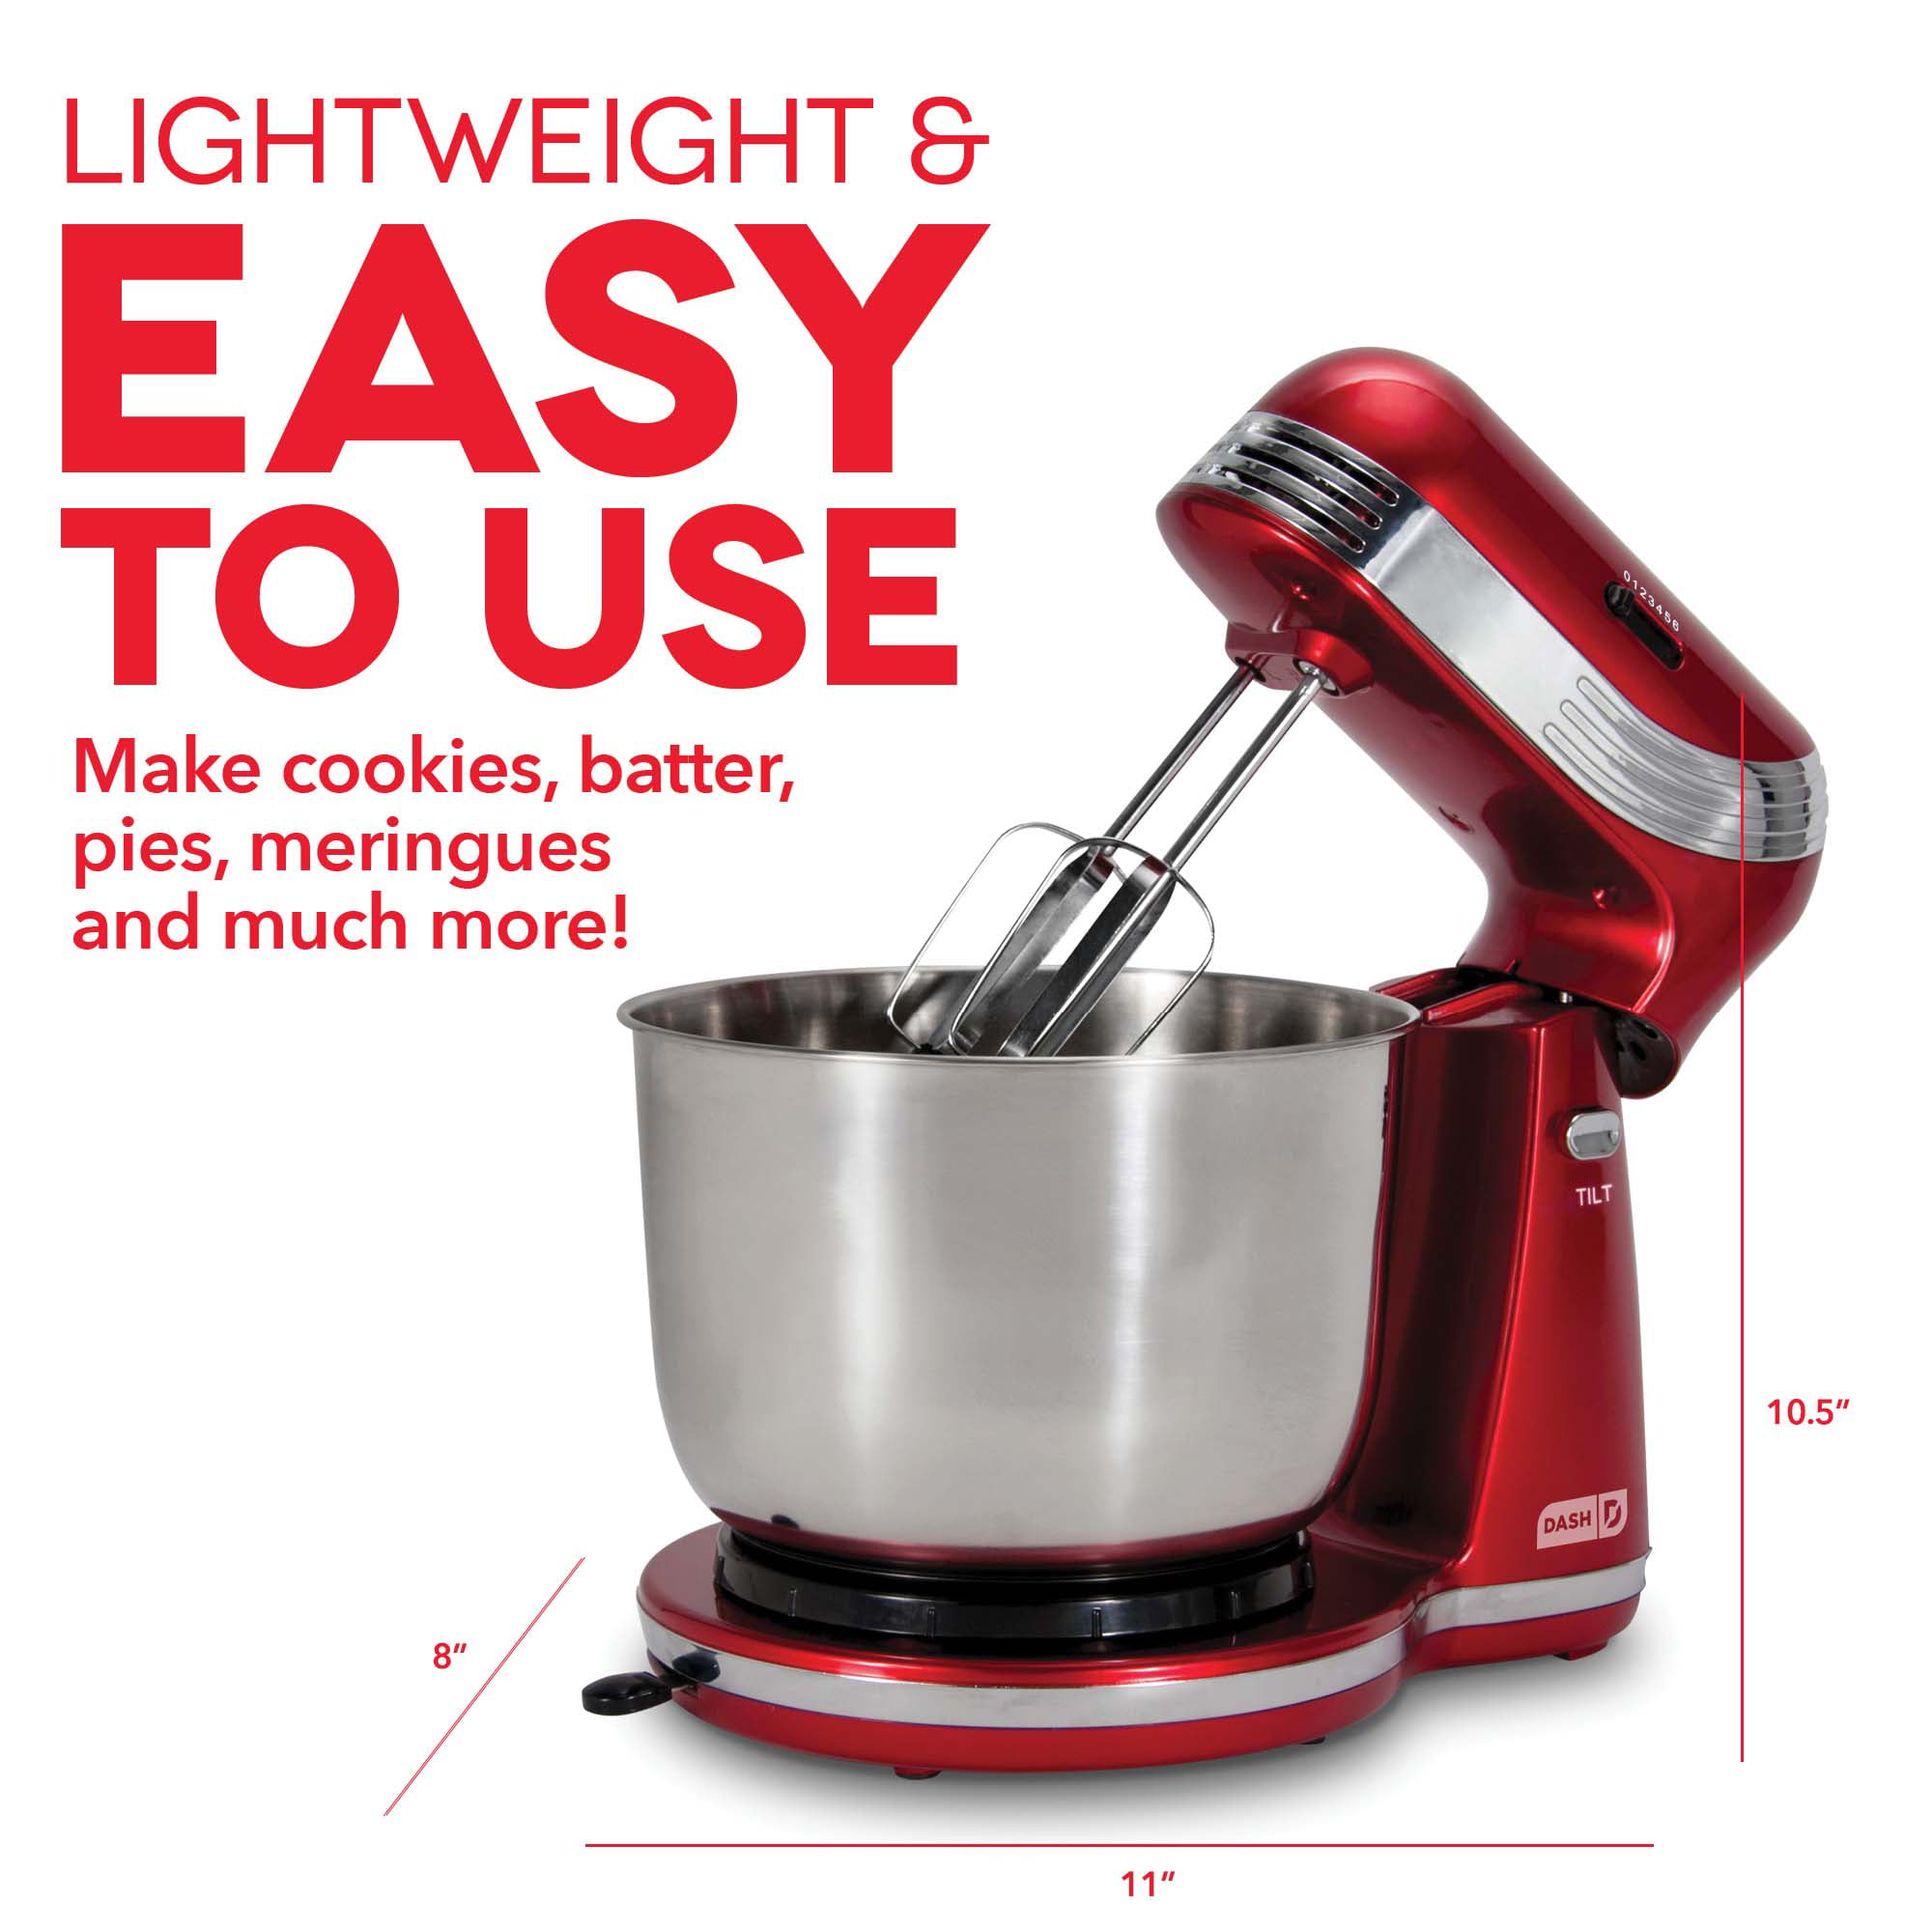 Dash Everyday Stand Mixer, Delivery Near You